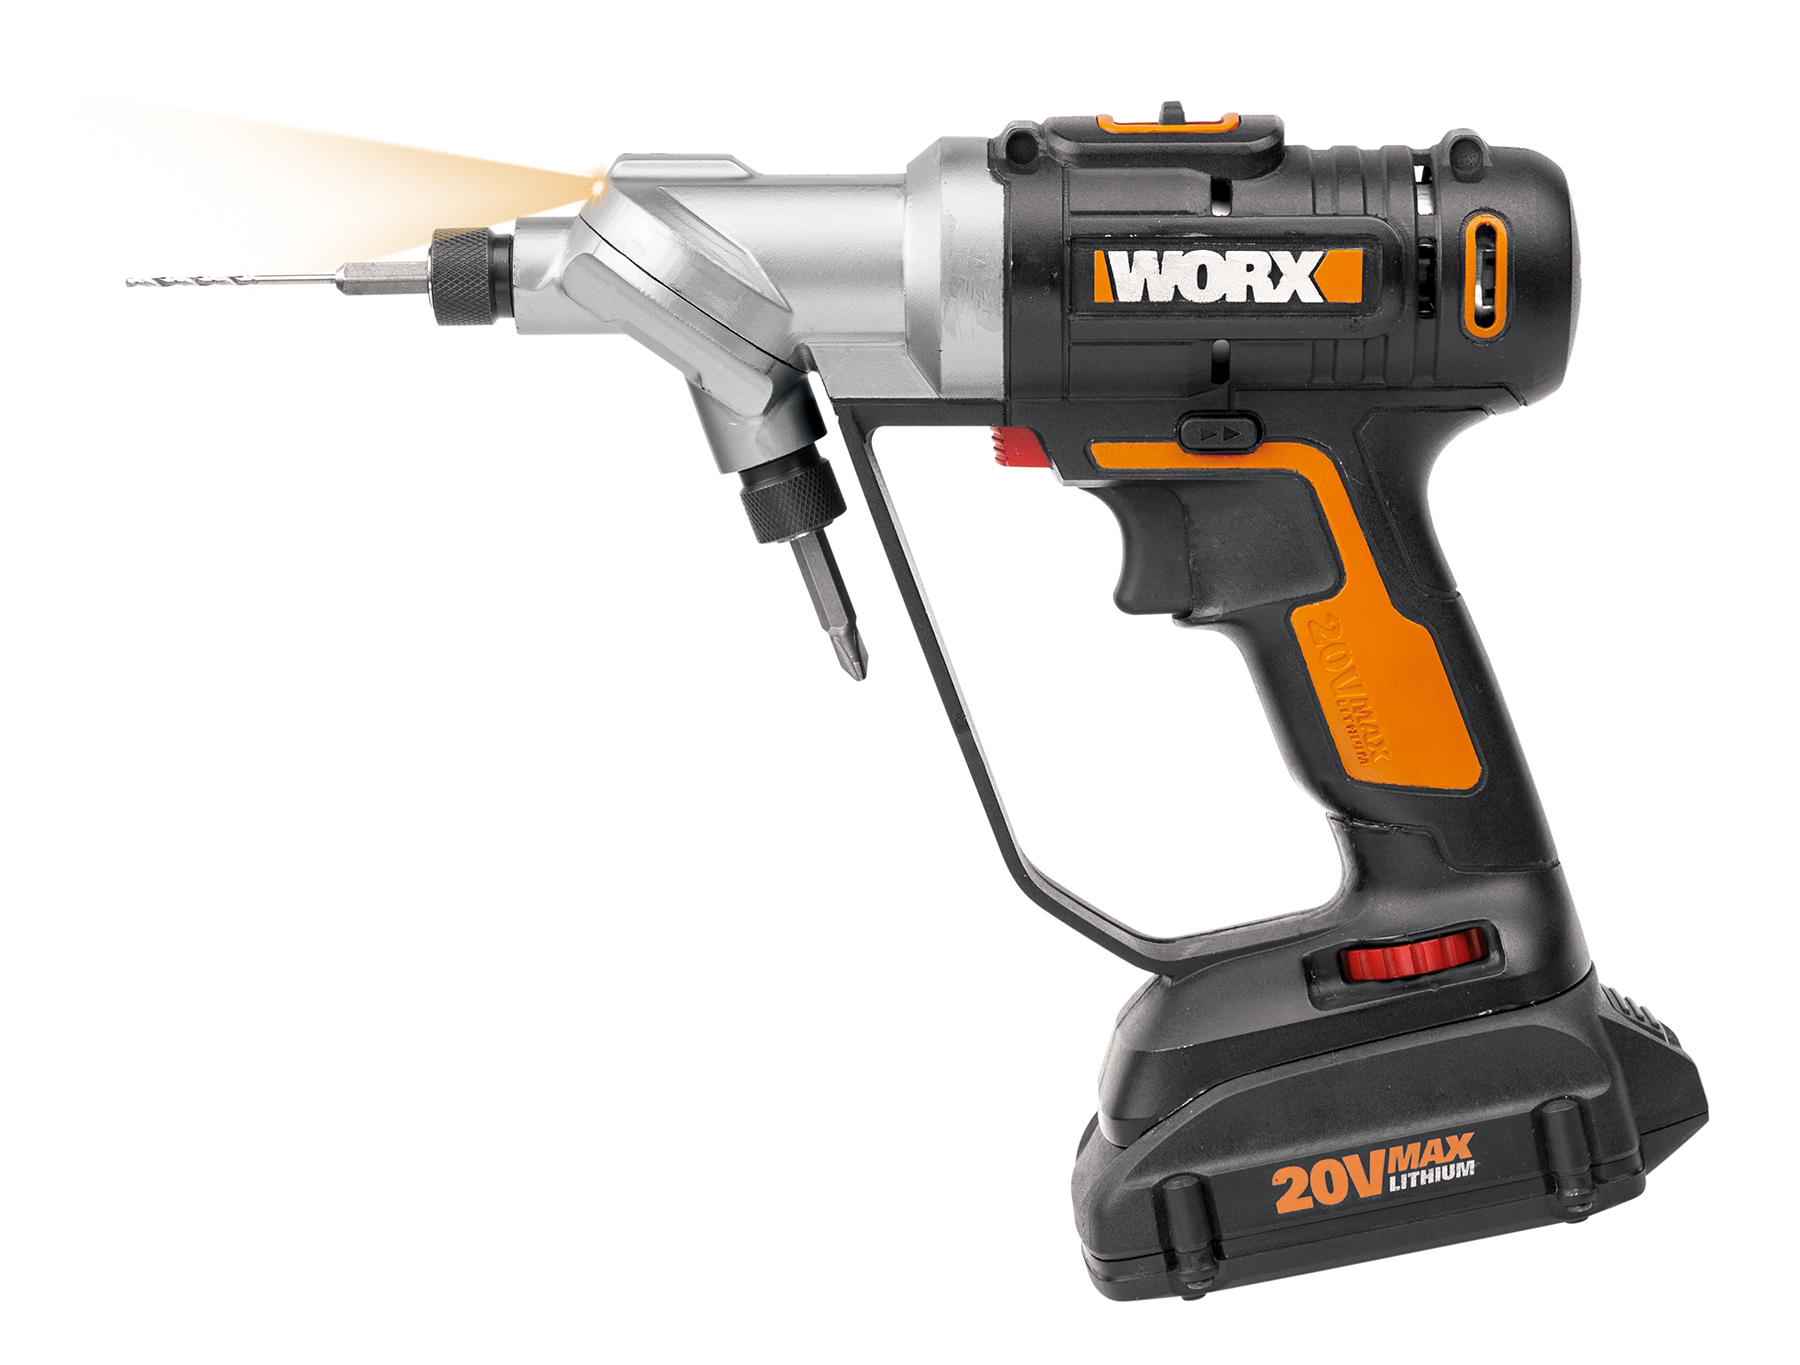 WORX 20V Switchdriver Drill and Driver has a patented rotating, dual chuck that makes switching between bits quick and easy.